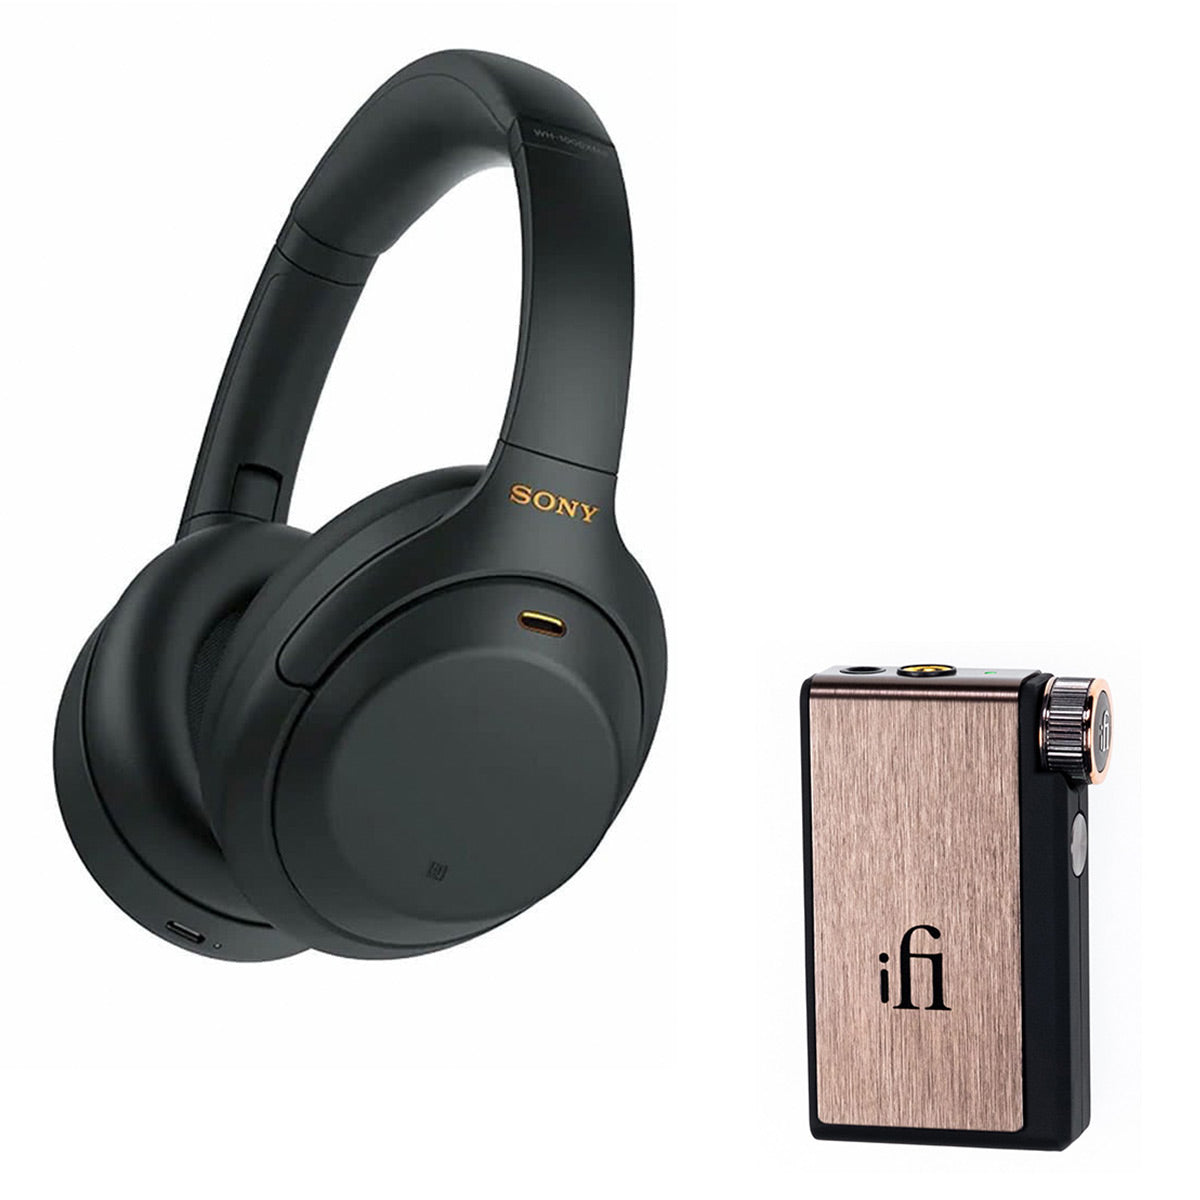 Sony WH-1000XM4 Wireless Noise Cancelling Over-Ear Headphones with iFi Audio Go blu Portable Bluetooth DAC/Headphone Amp